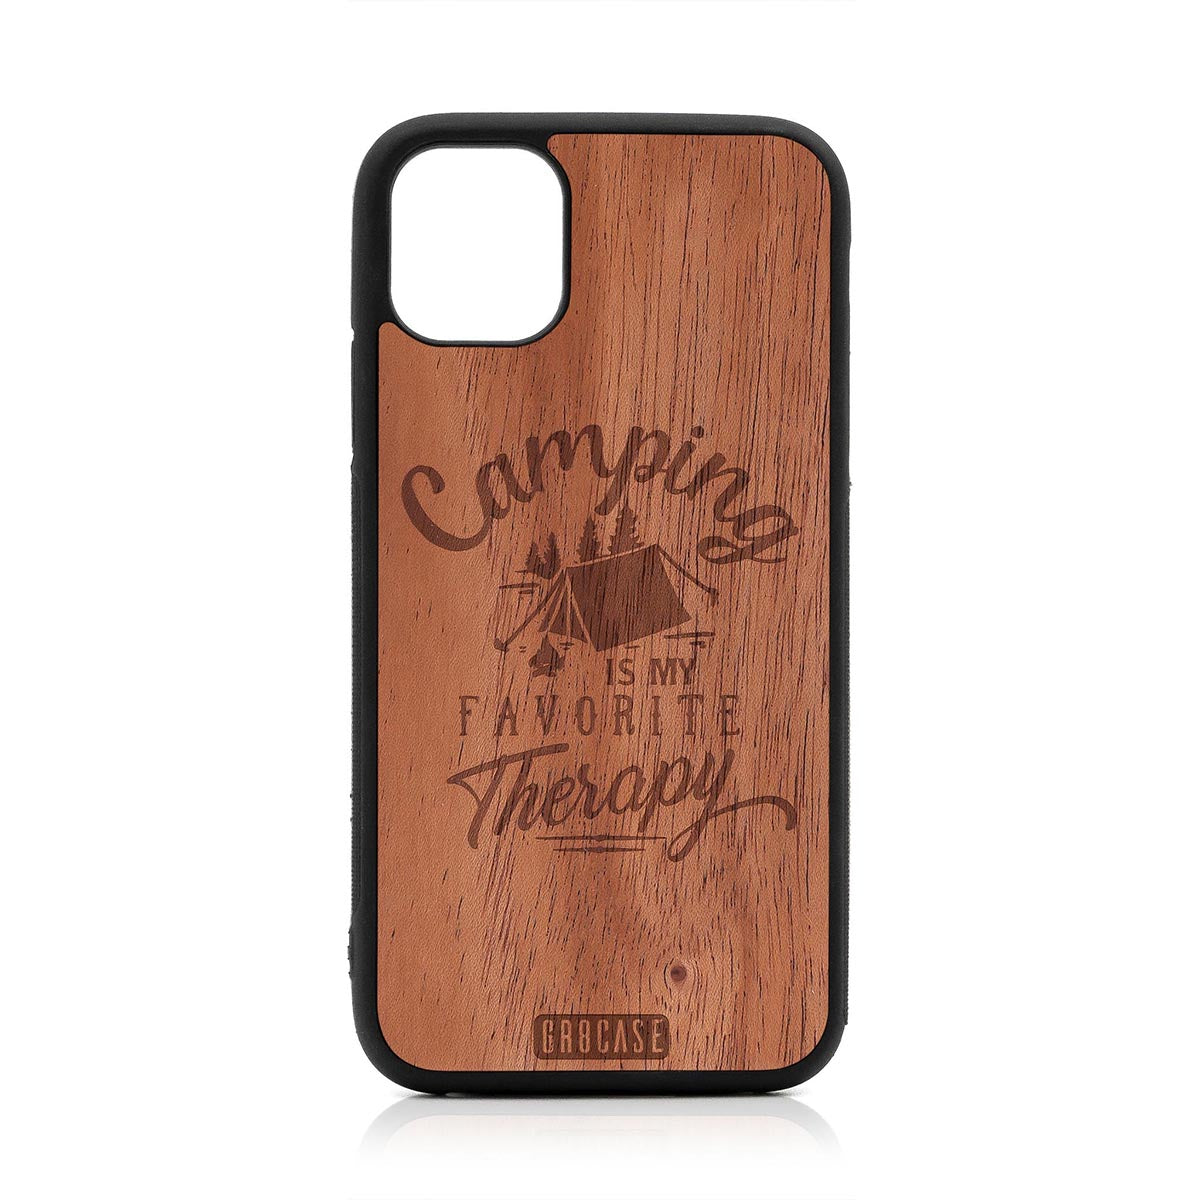 Camping Is My Favorite Therapy Design Wood Case For iPhone 11 by GR8CASE